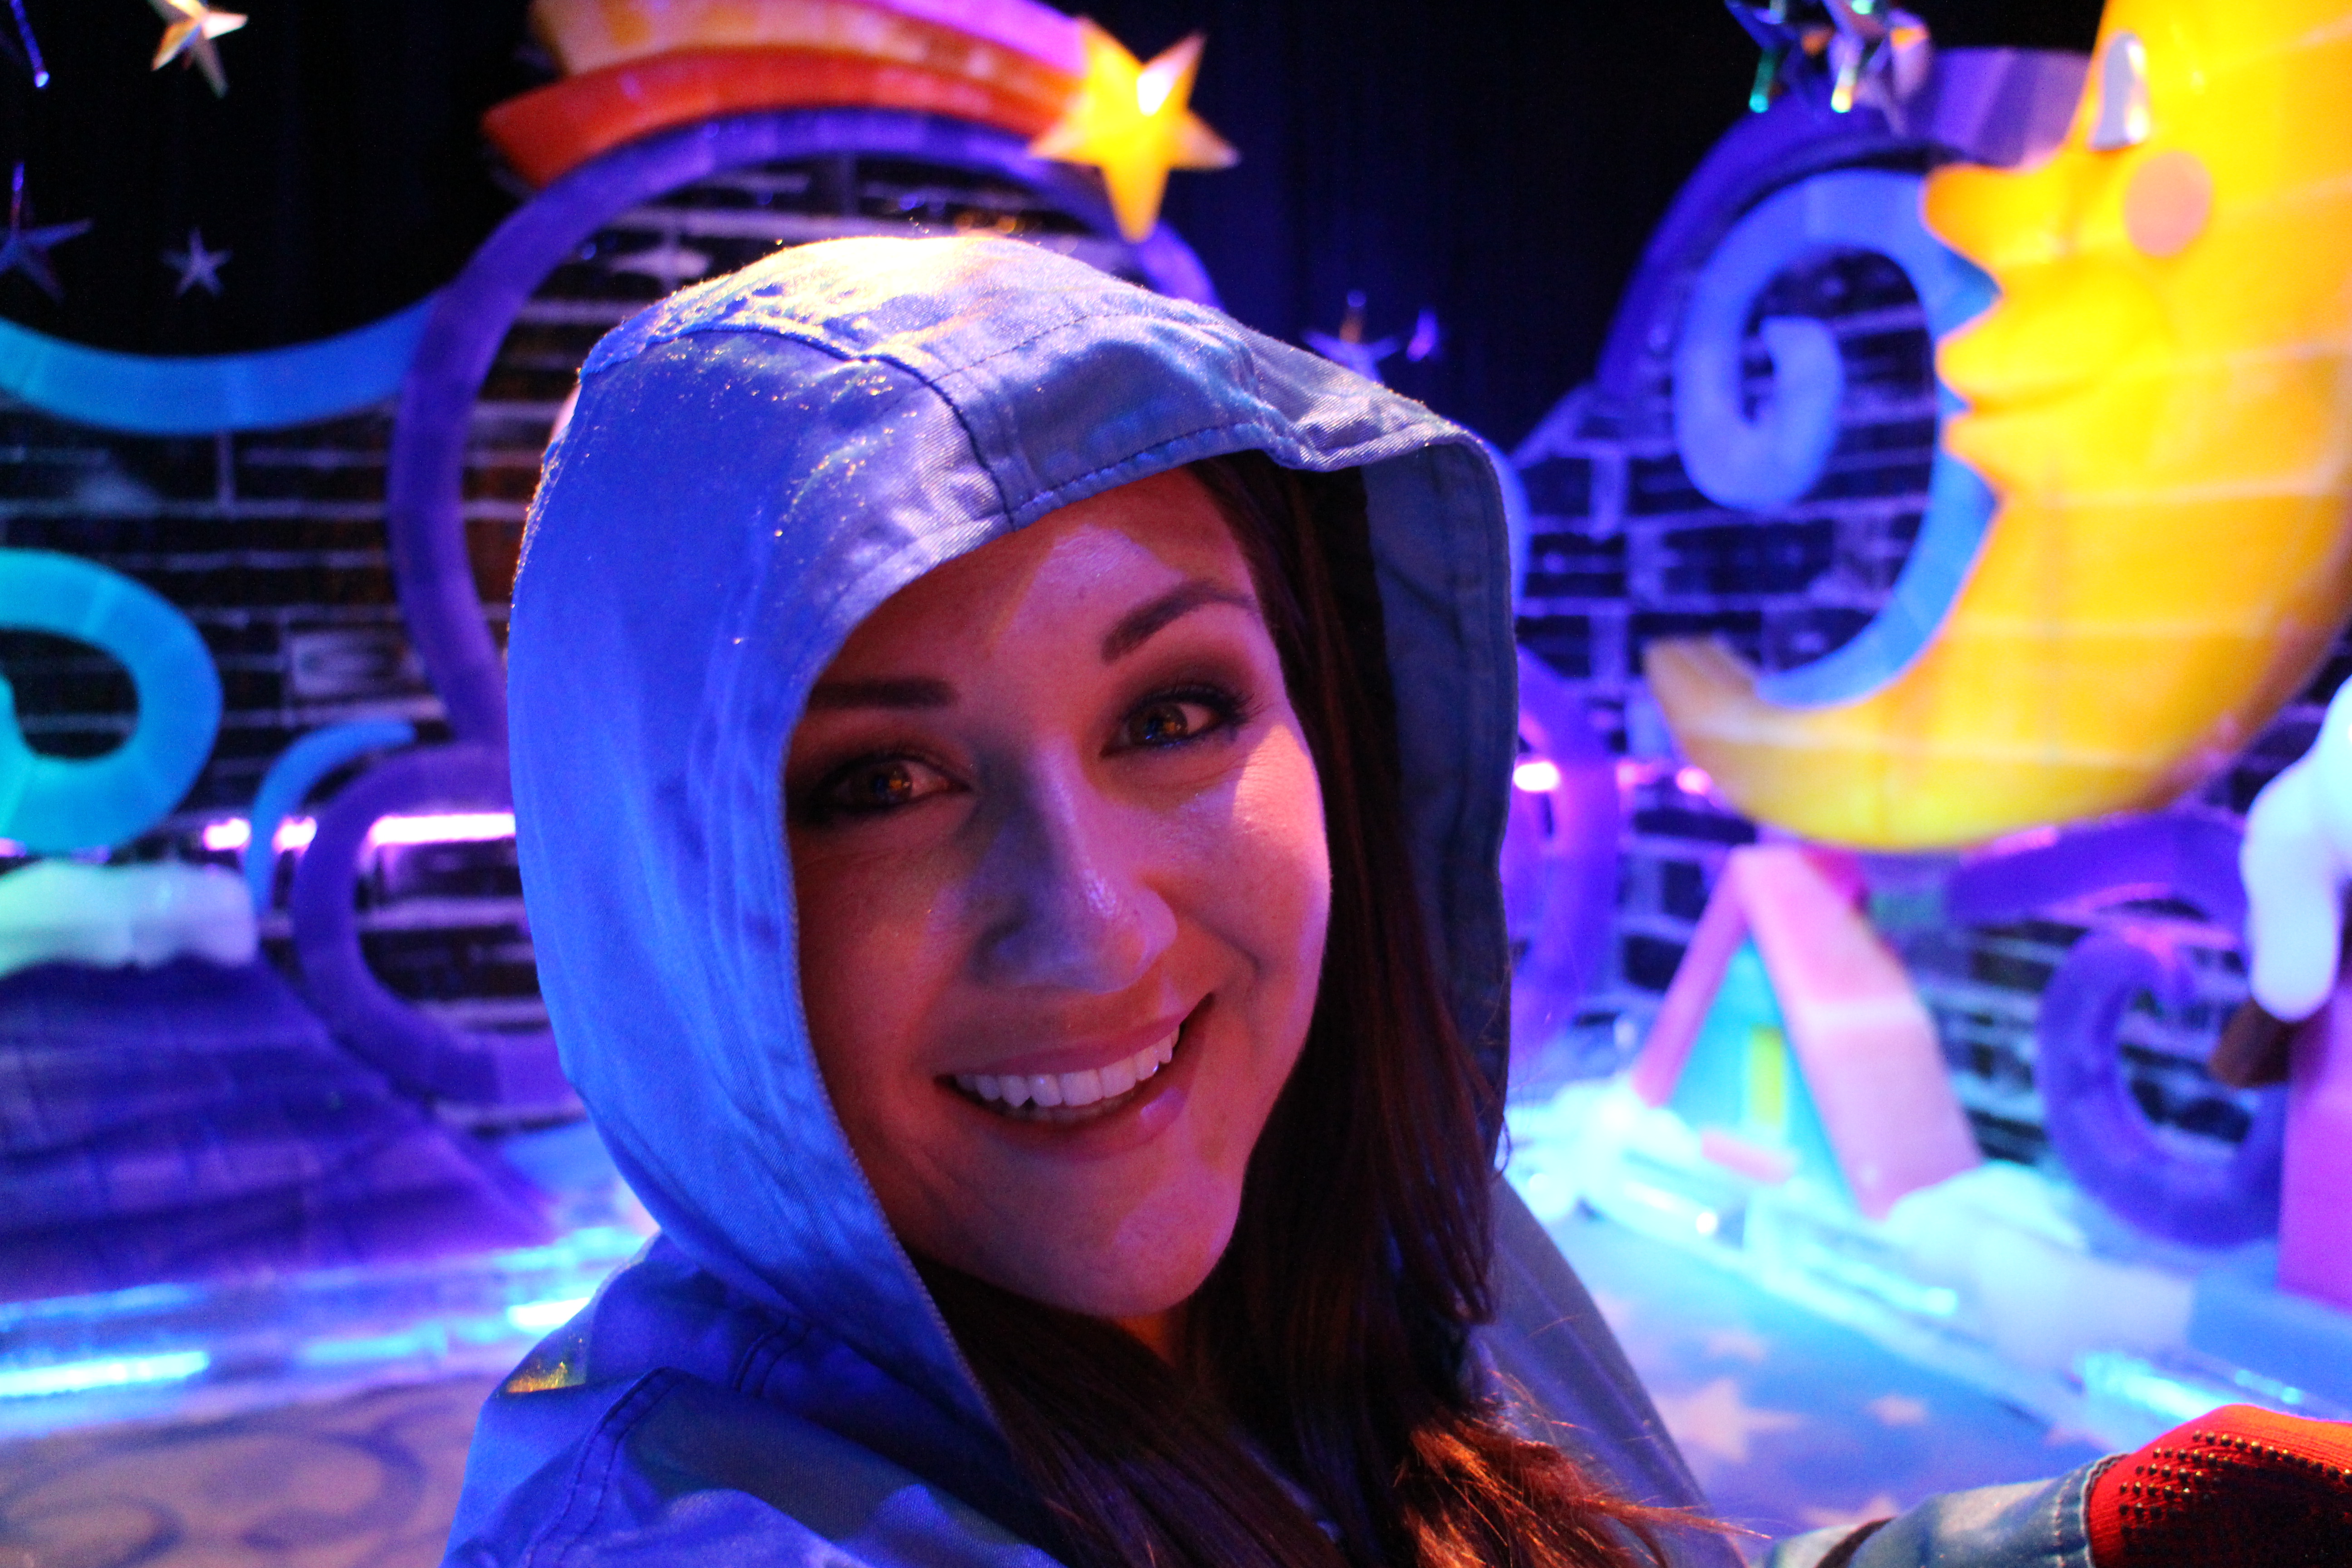 Sparkly Nicole at Gaylord Palms ICE! 2015 SparklyEverAfter.com